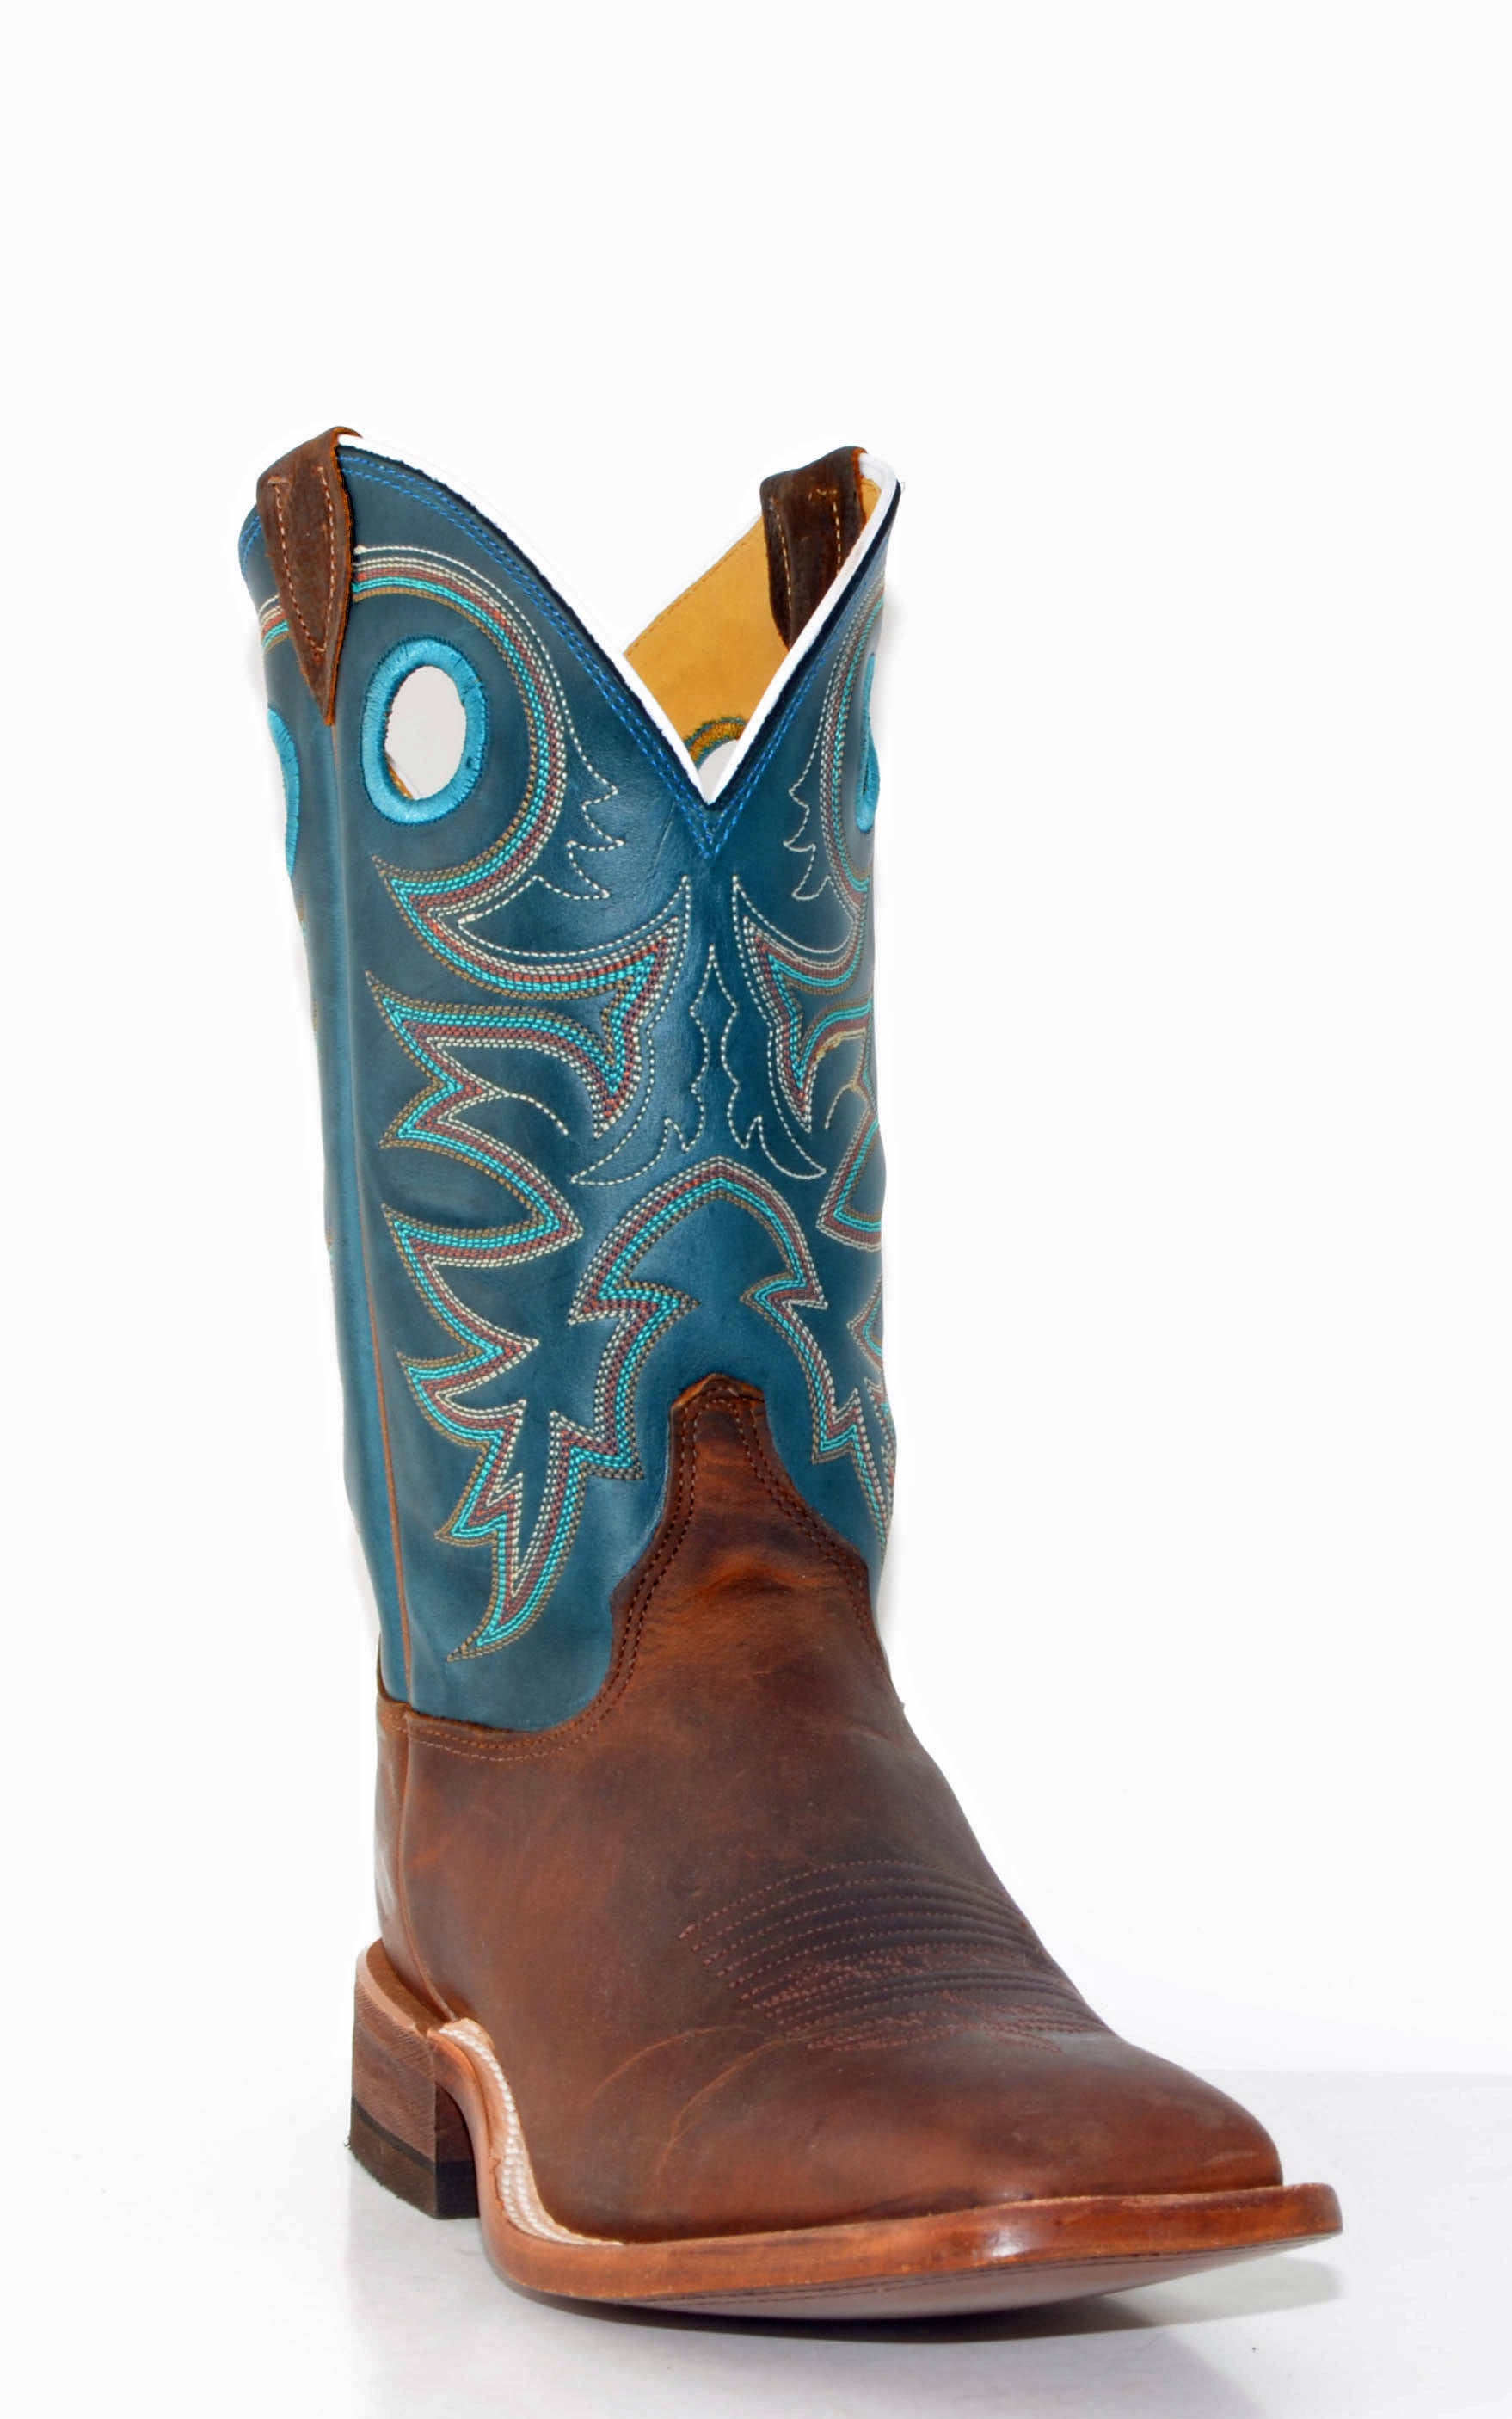 justin turquoise boots